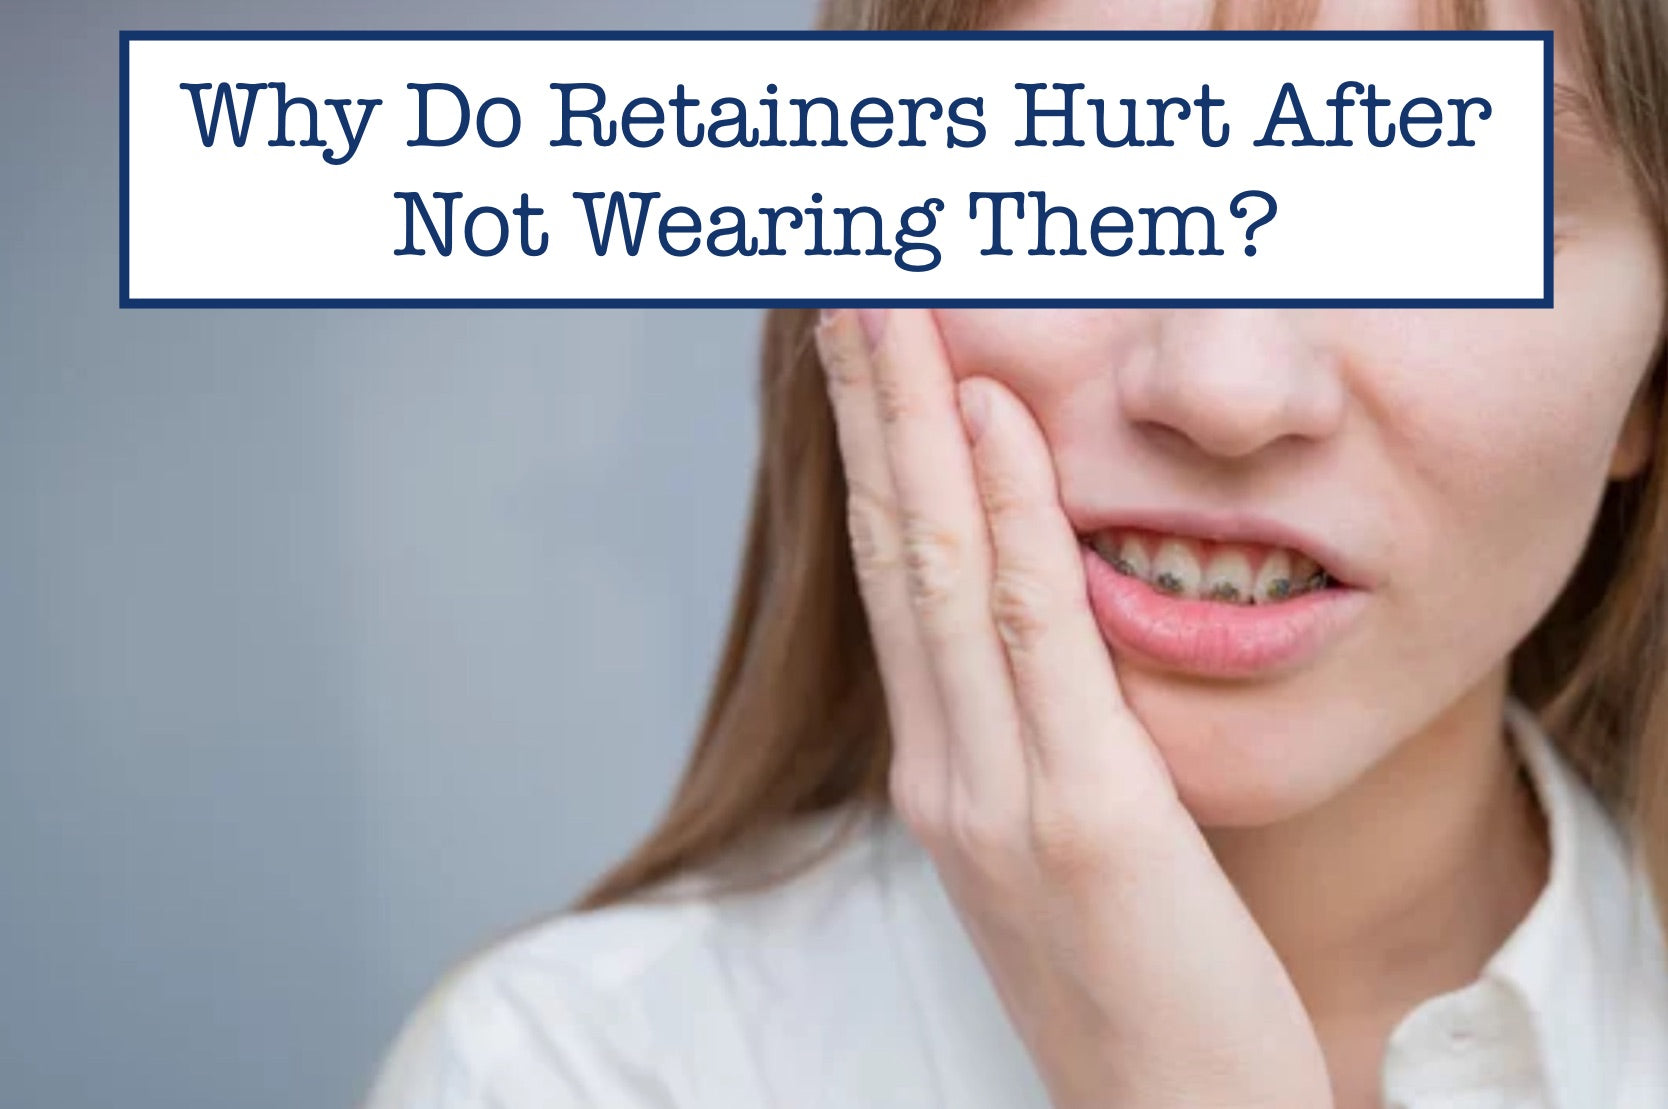 Why Do Retainers Hurt After Not Wearing Them?